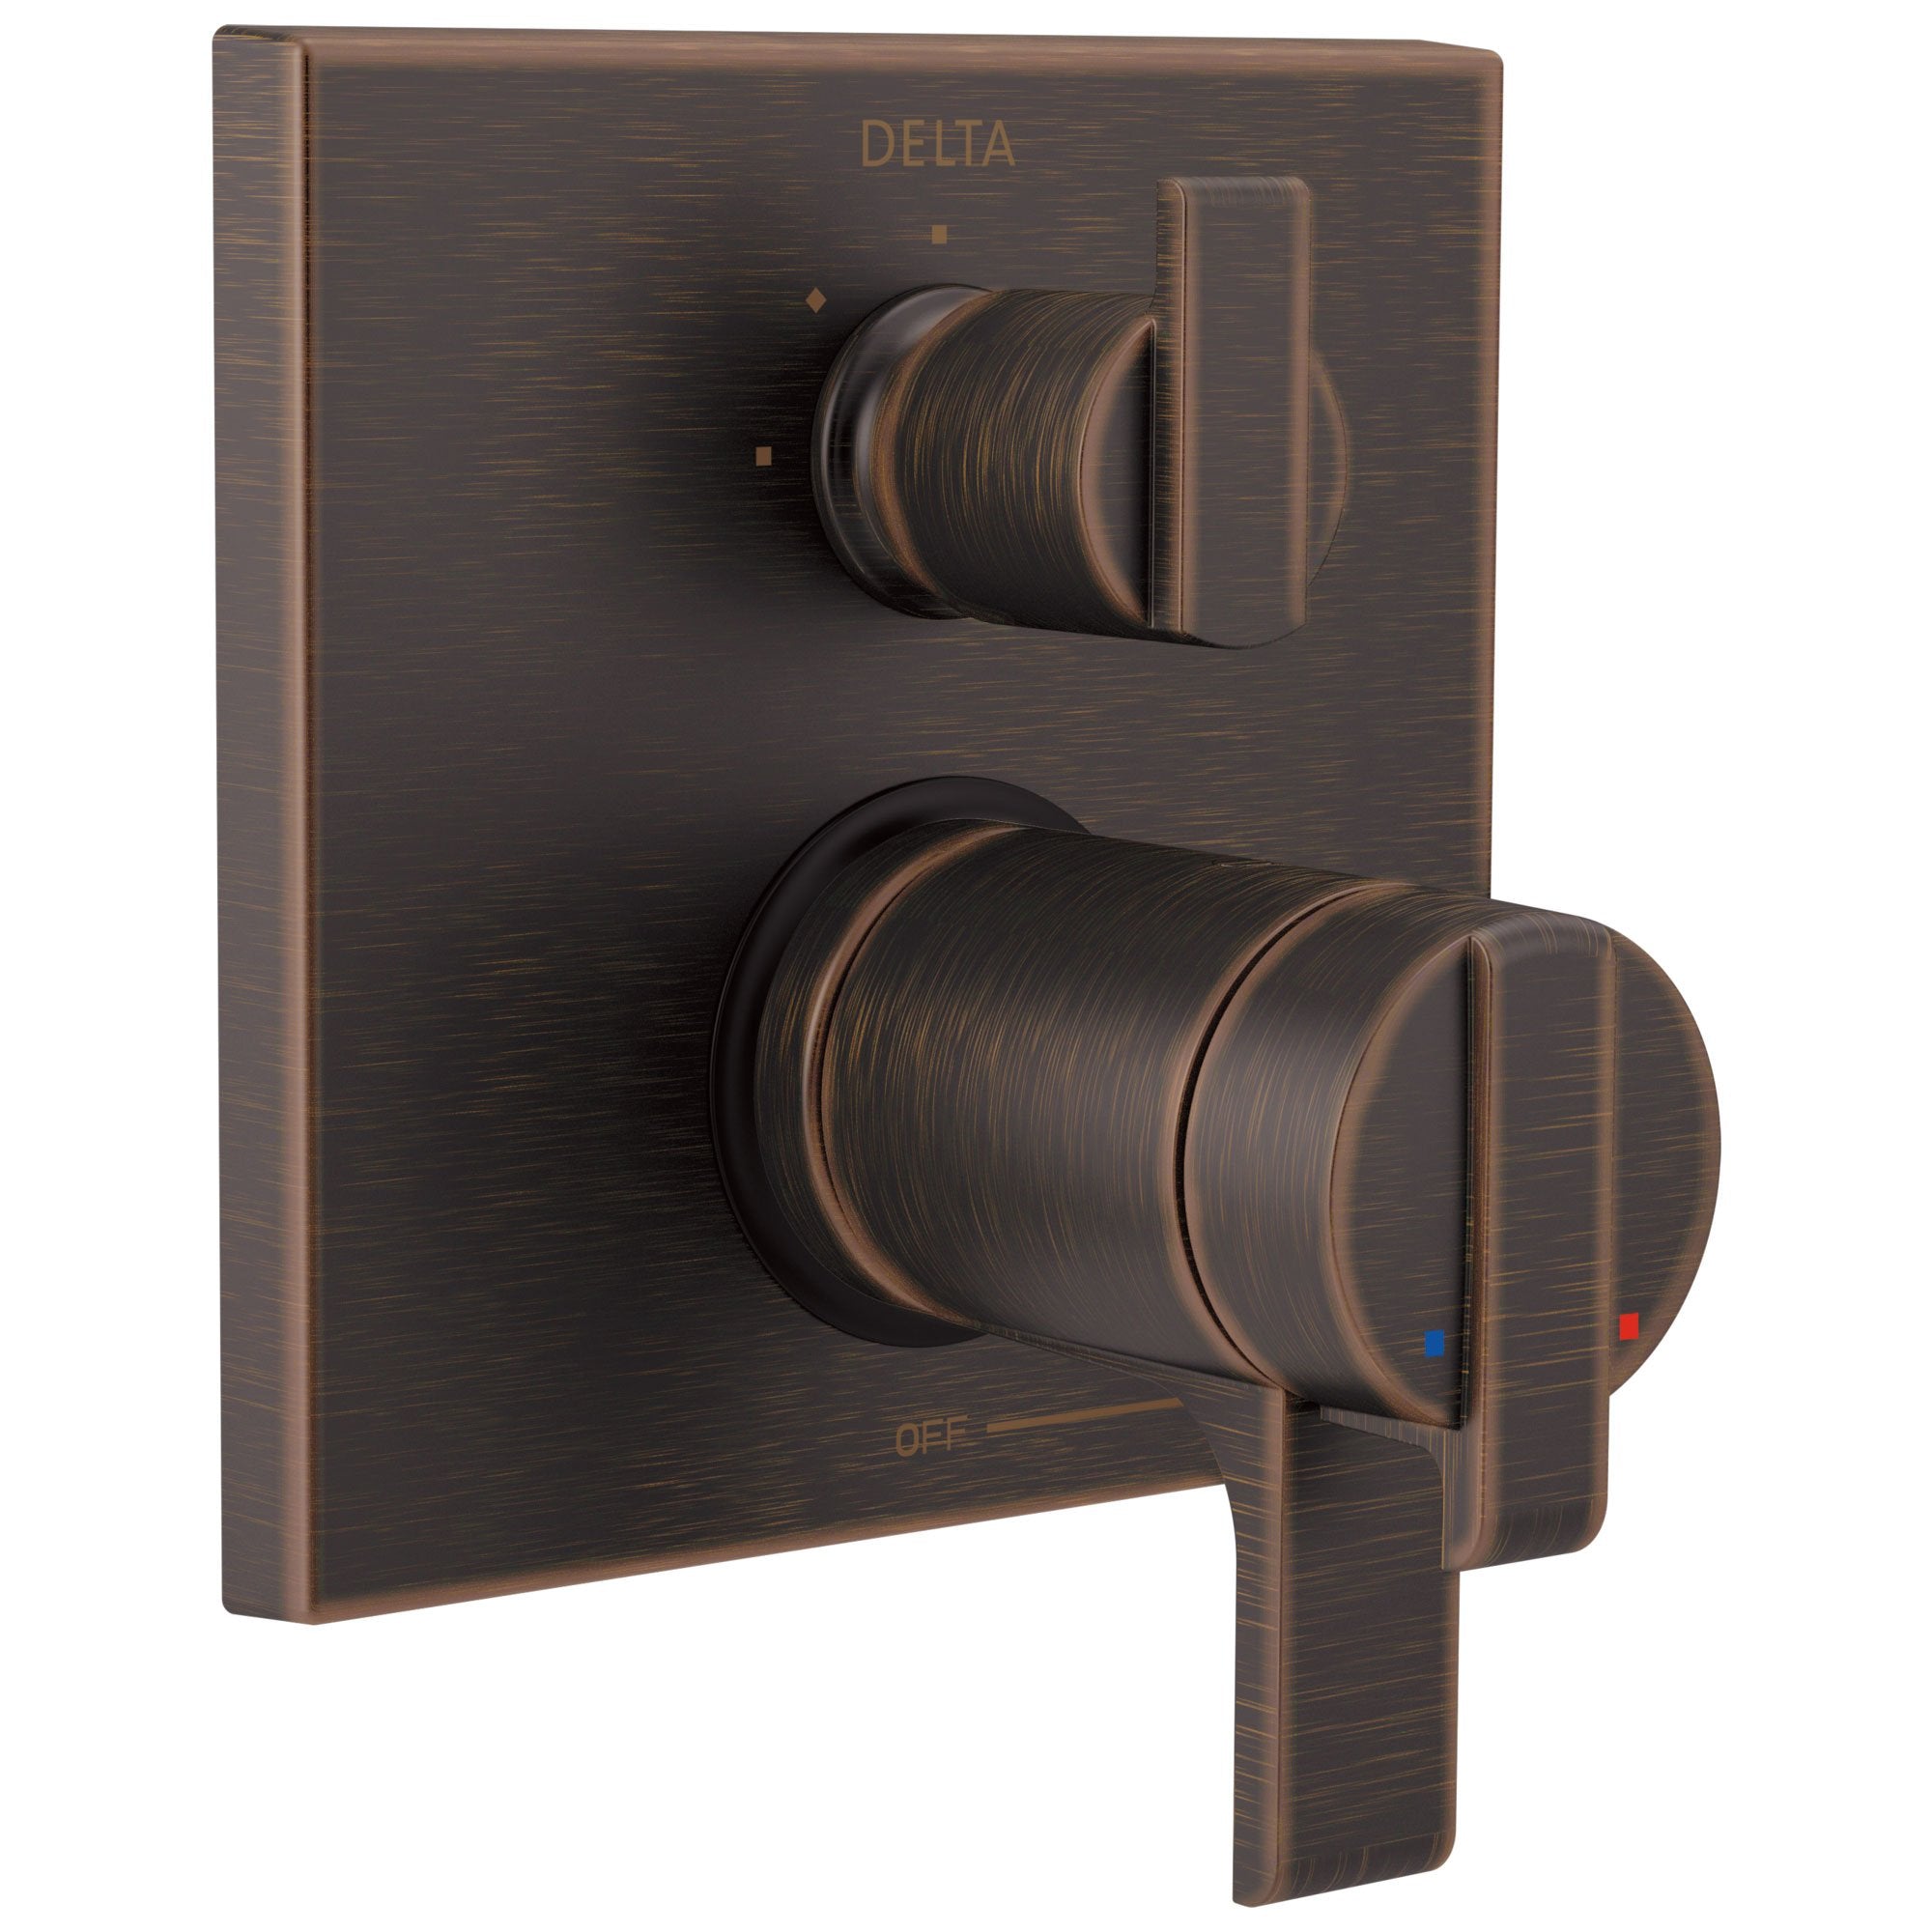 Delta Ara Venetian Bronze Modern Thermostatic Shower Faucet Control with 3-Setting Integrated Diverter Includes Trim Kit and Rough-in Valve with Stops D2133V